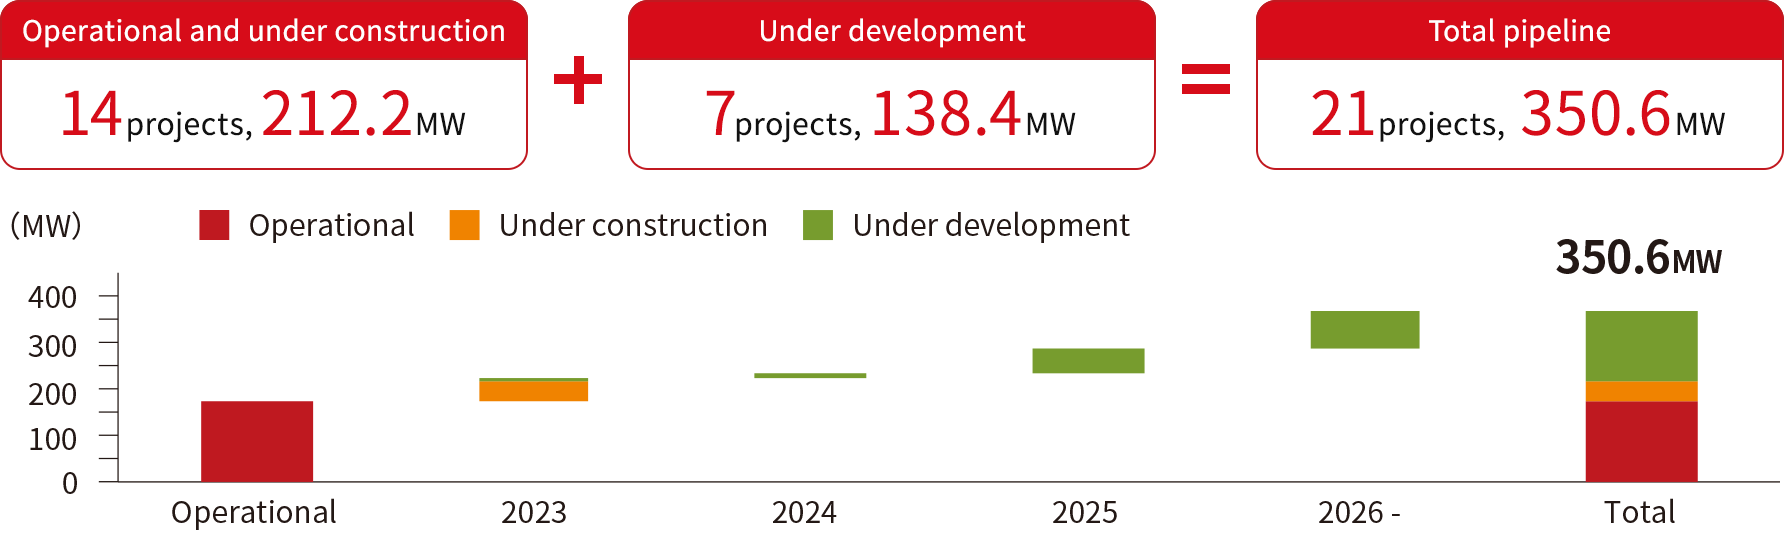 Operational and under construction 14projects, 212.2MW + Under development 7projects, 138.4MW = Total pipeline 21projects, 350.6MW